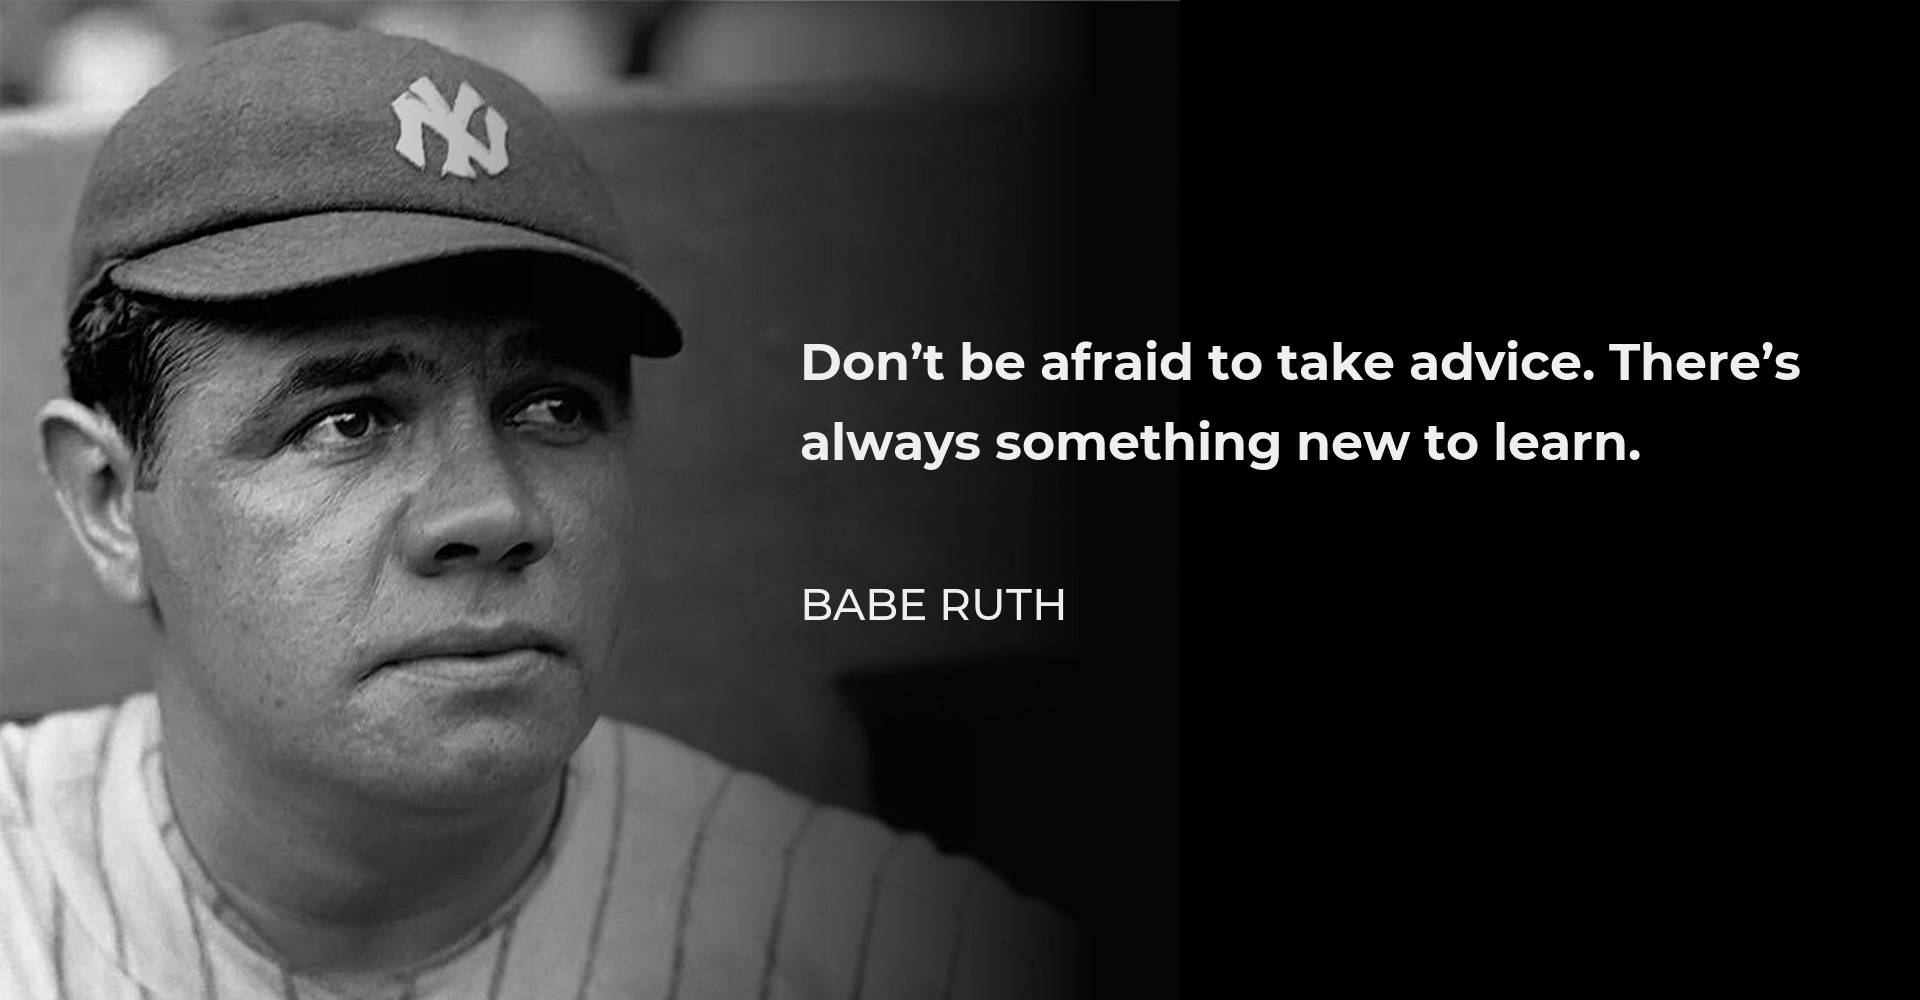 Babe Ruth Quote About Learning Wallpaper